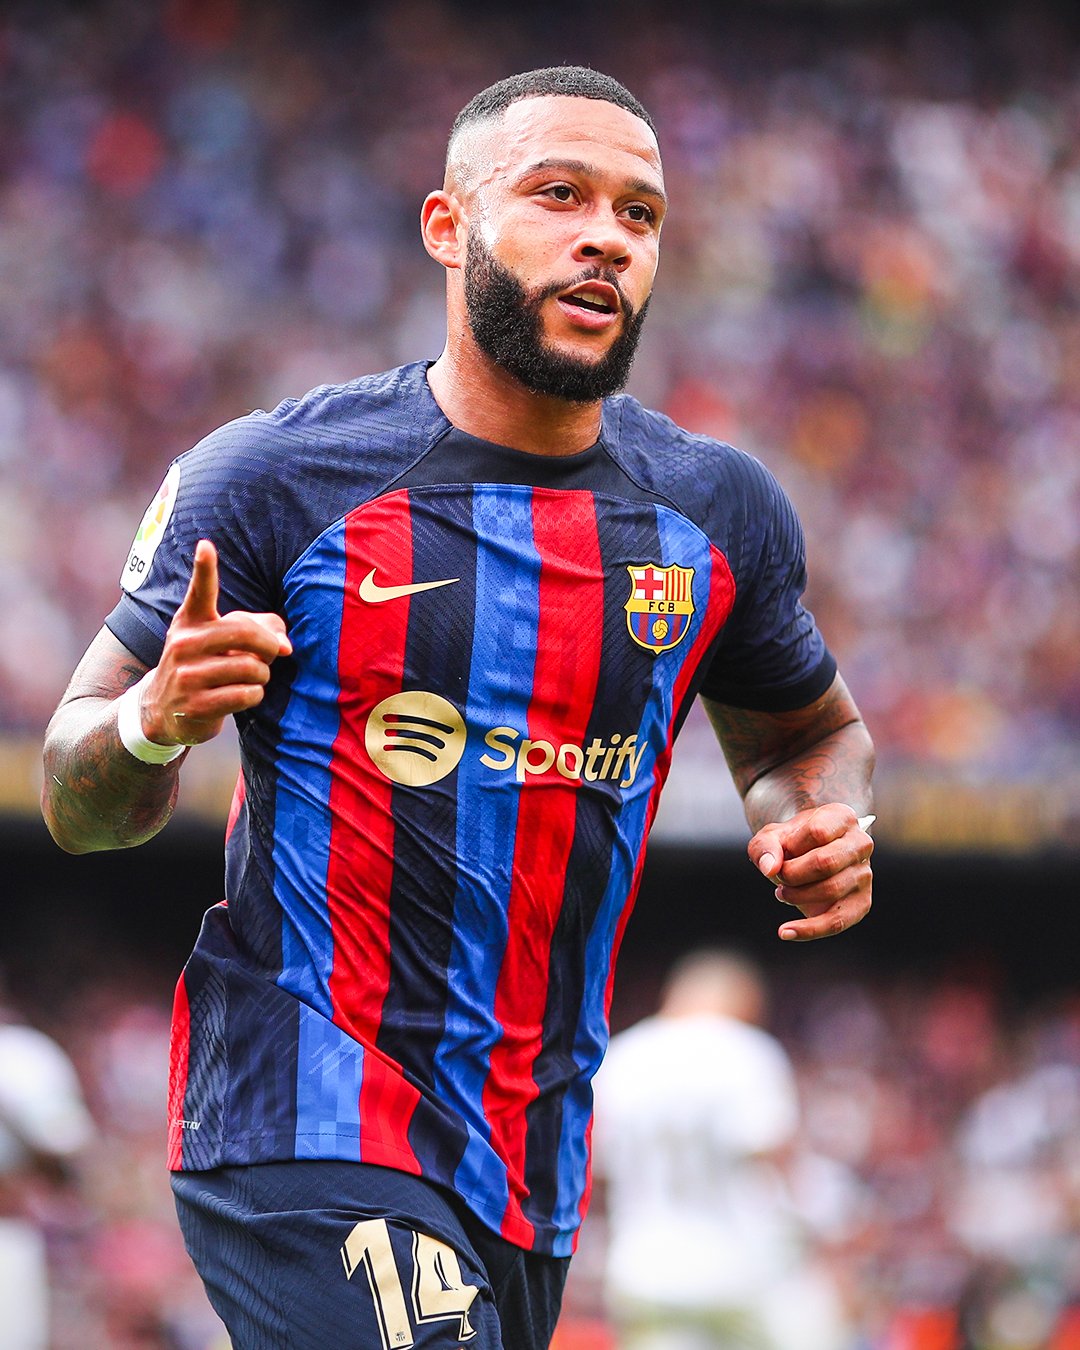 Depay was on target in Barcelona's victory against Elche